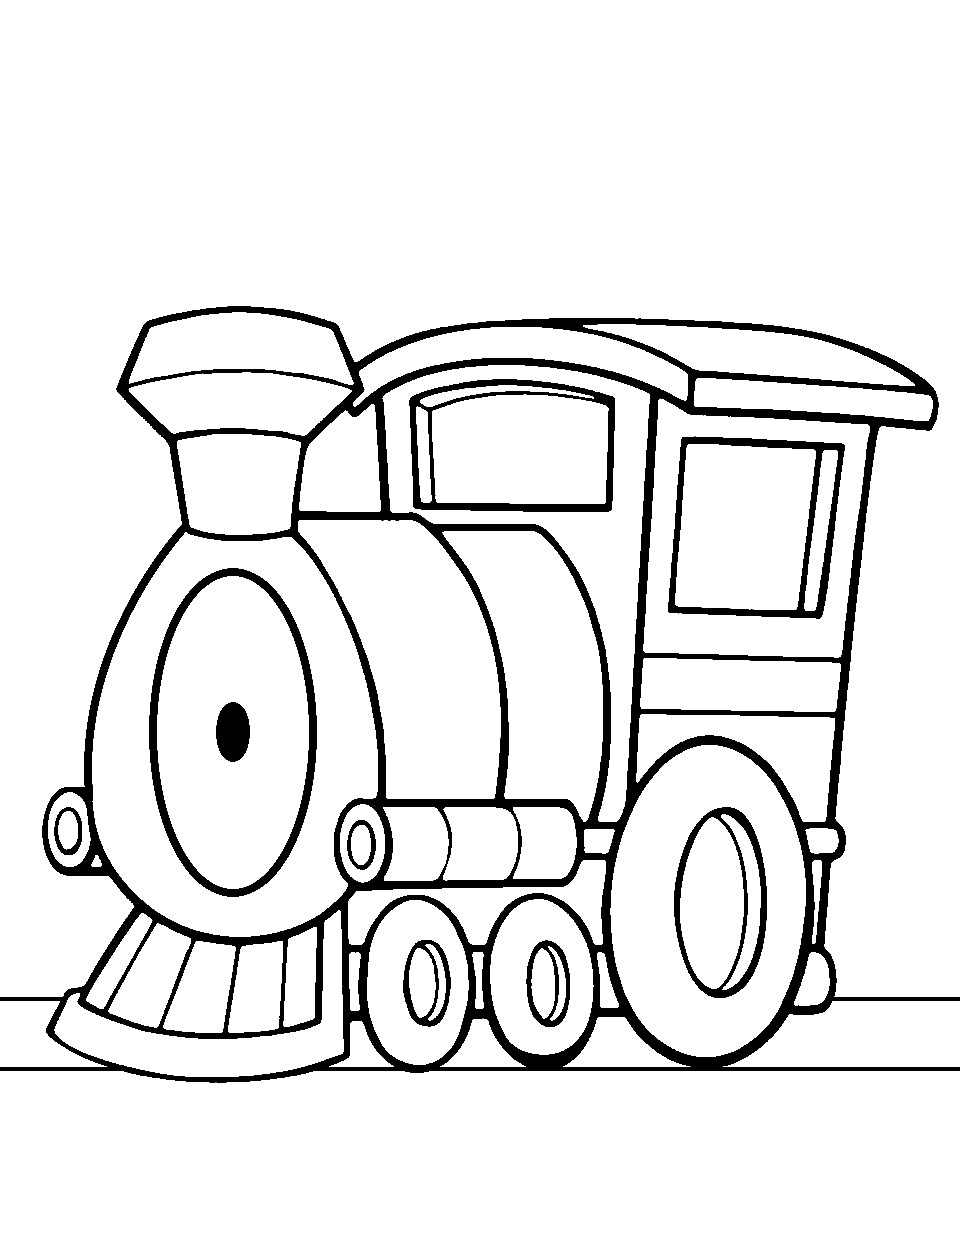 Toddler's Toy Train Coloring Page - A colorful toy train perfect for young kids.